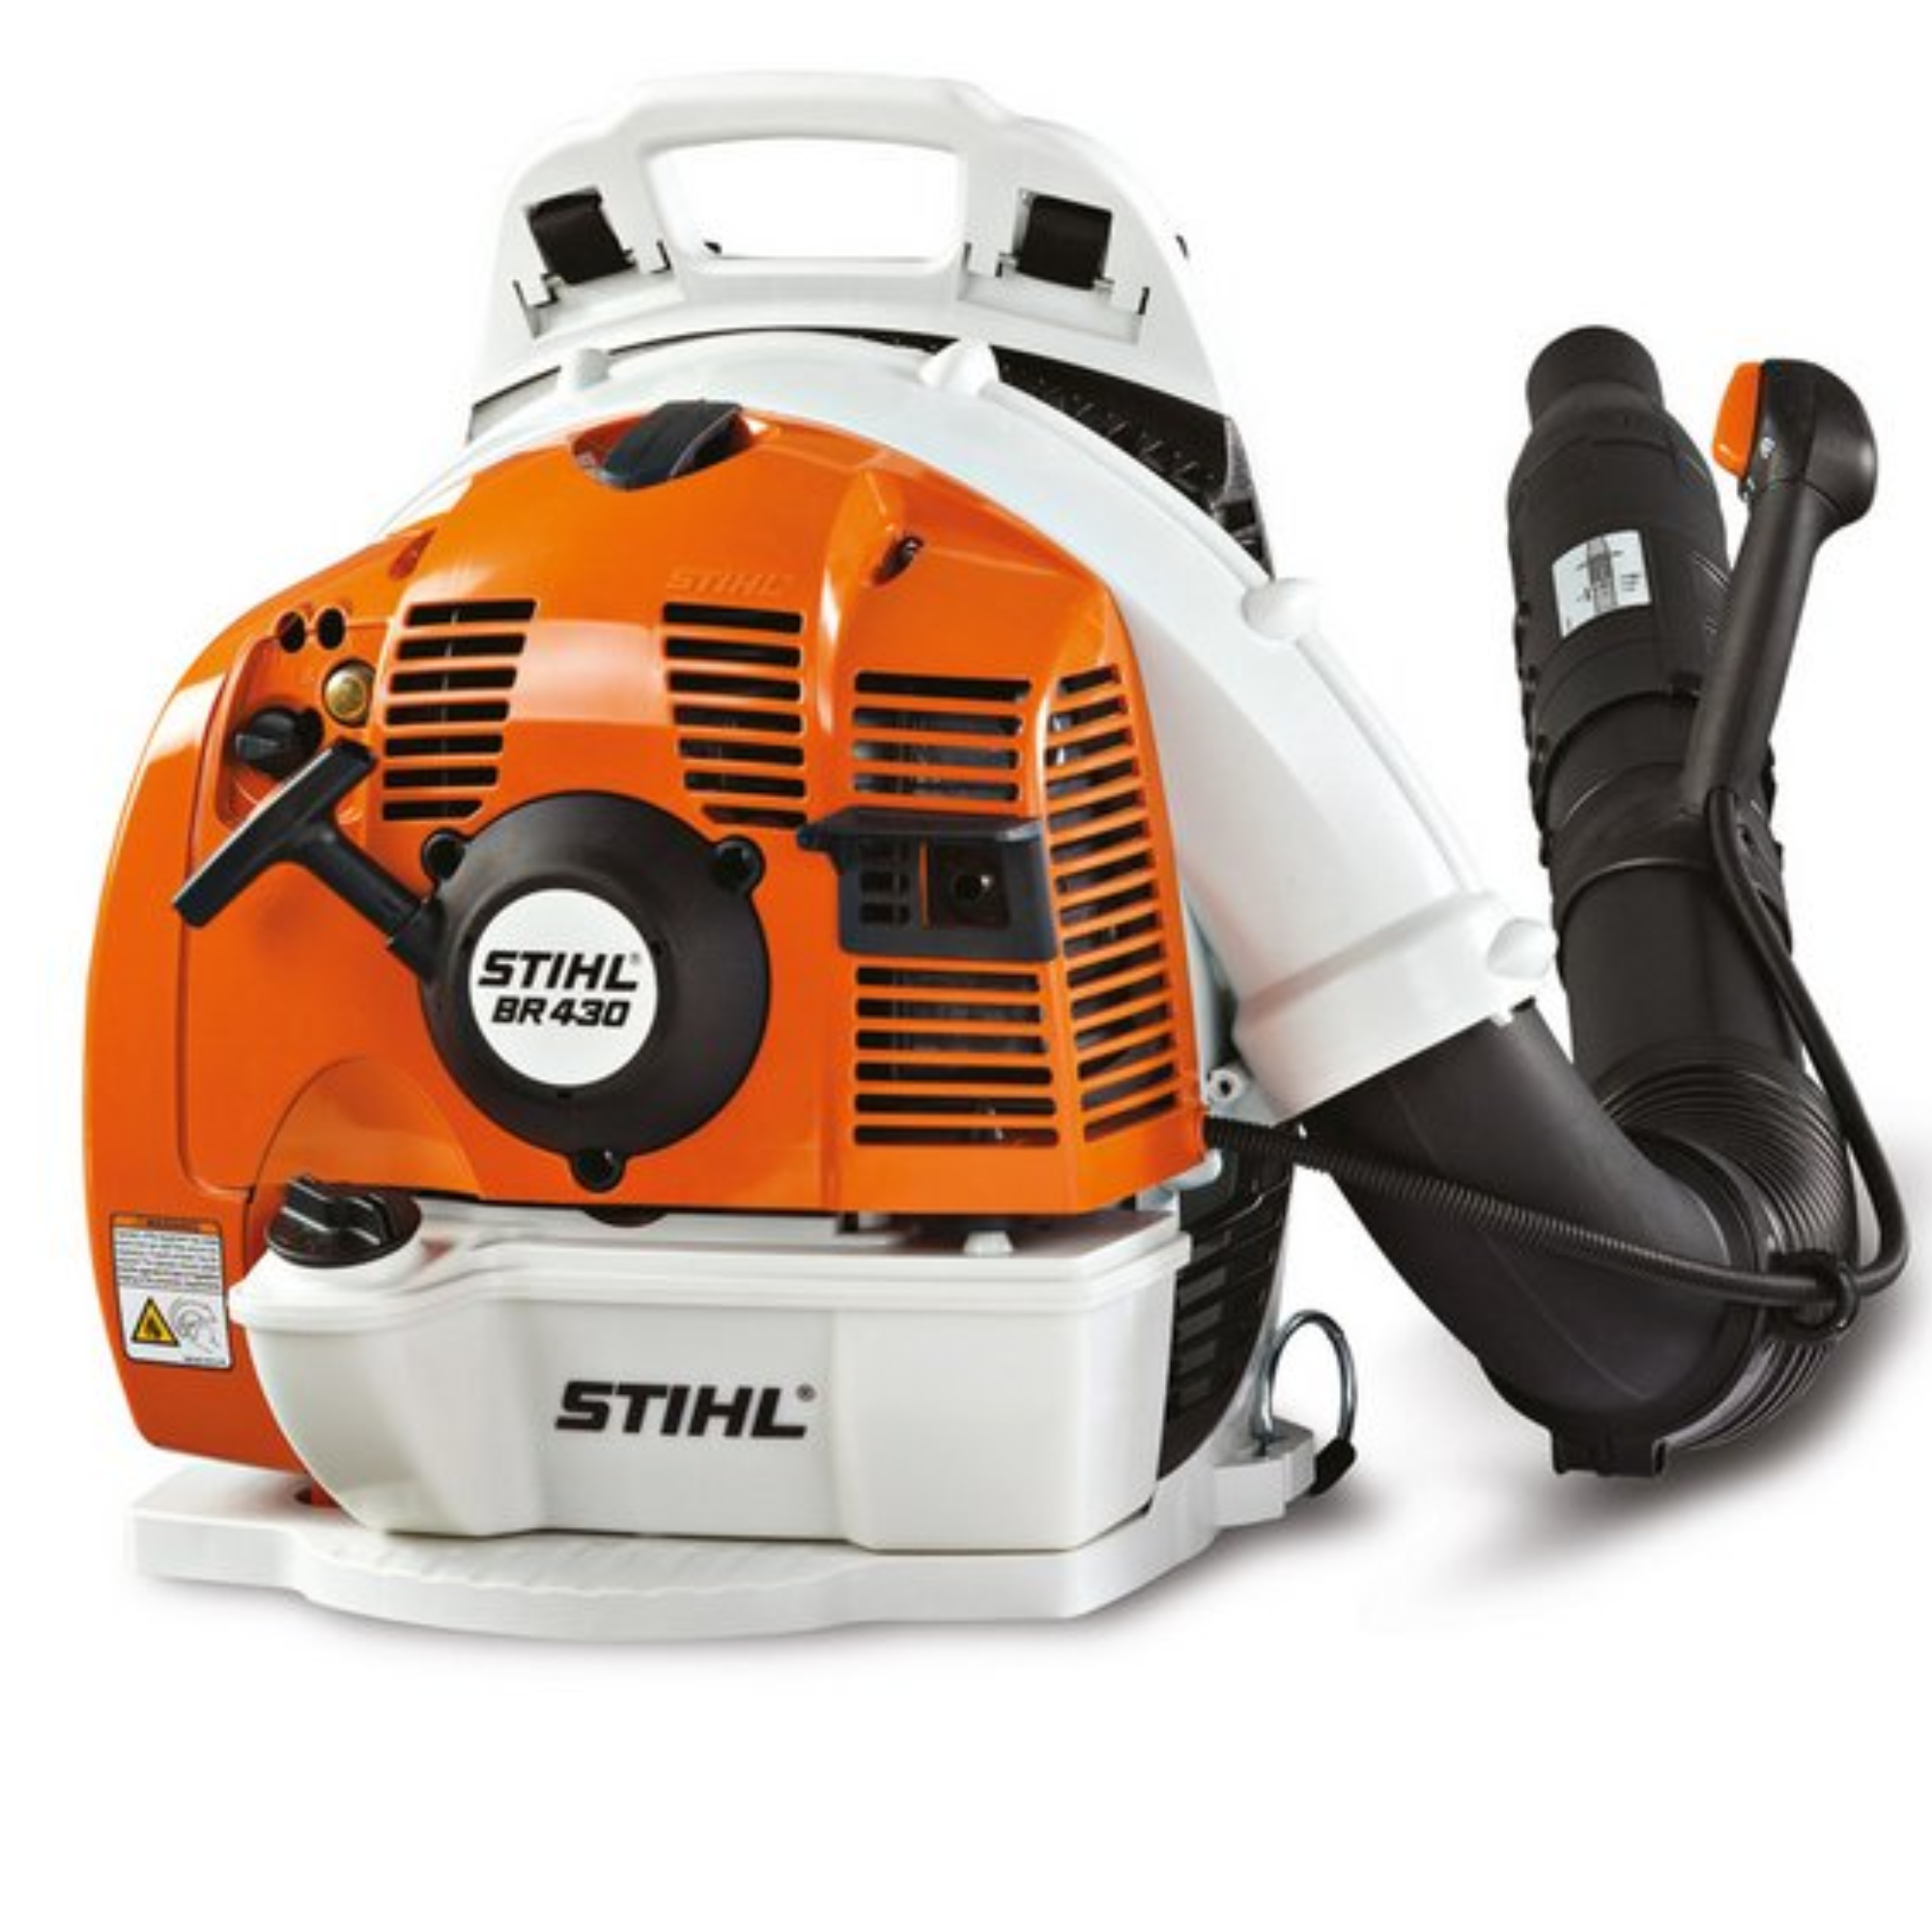 Stihl BR 430 Gas Powered Backpack Blower